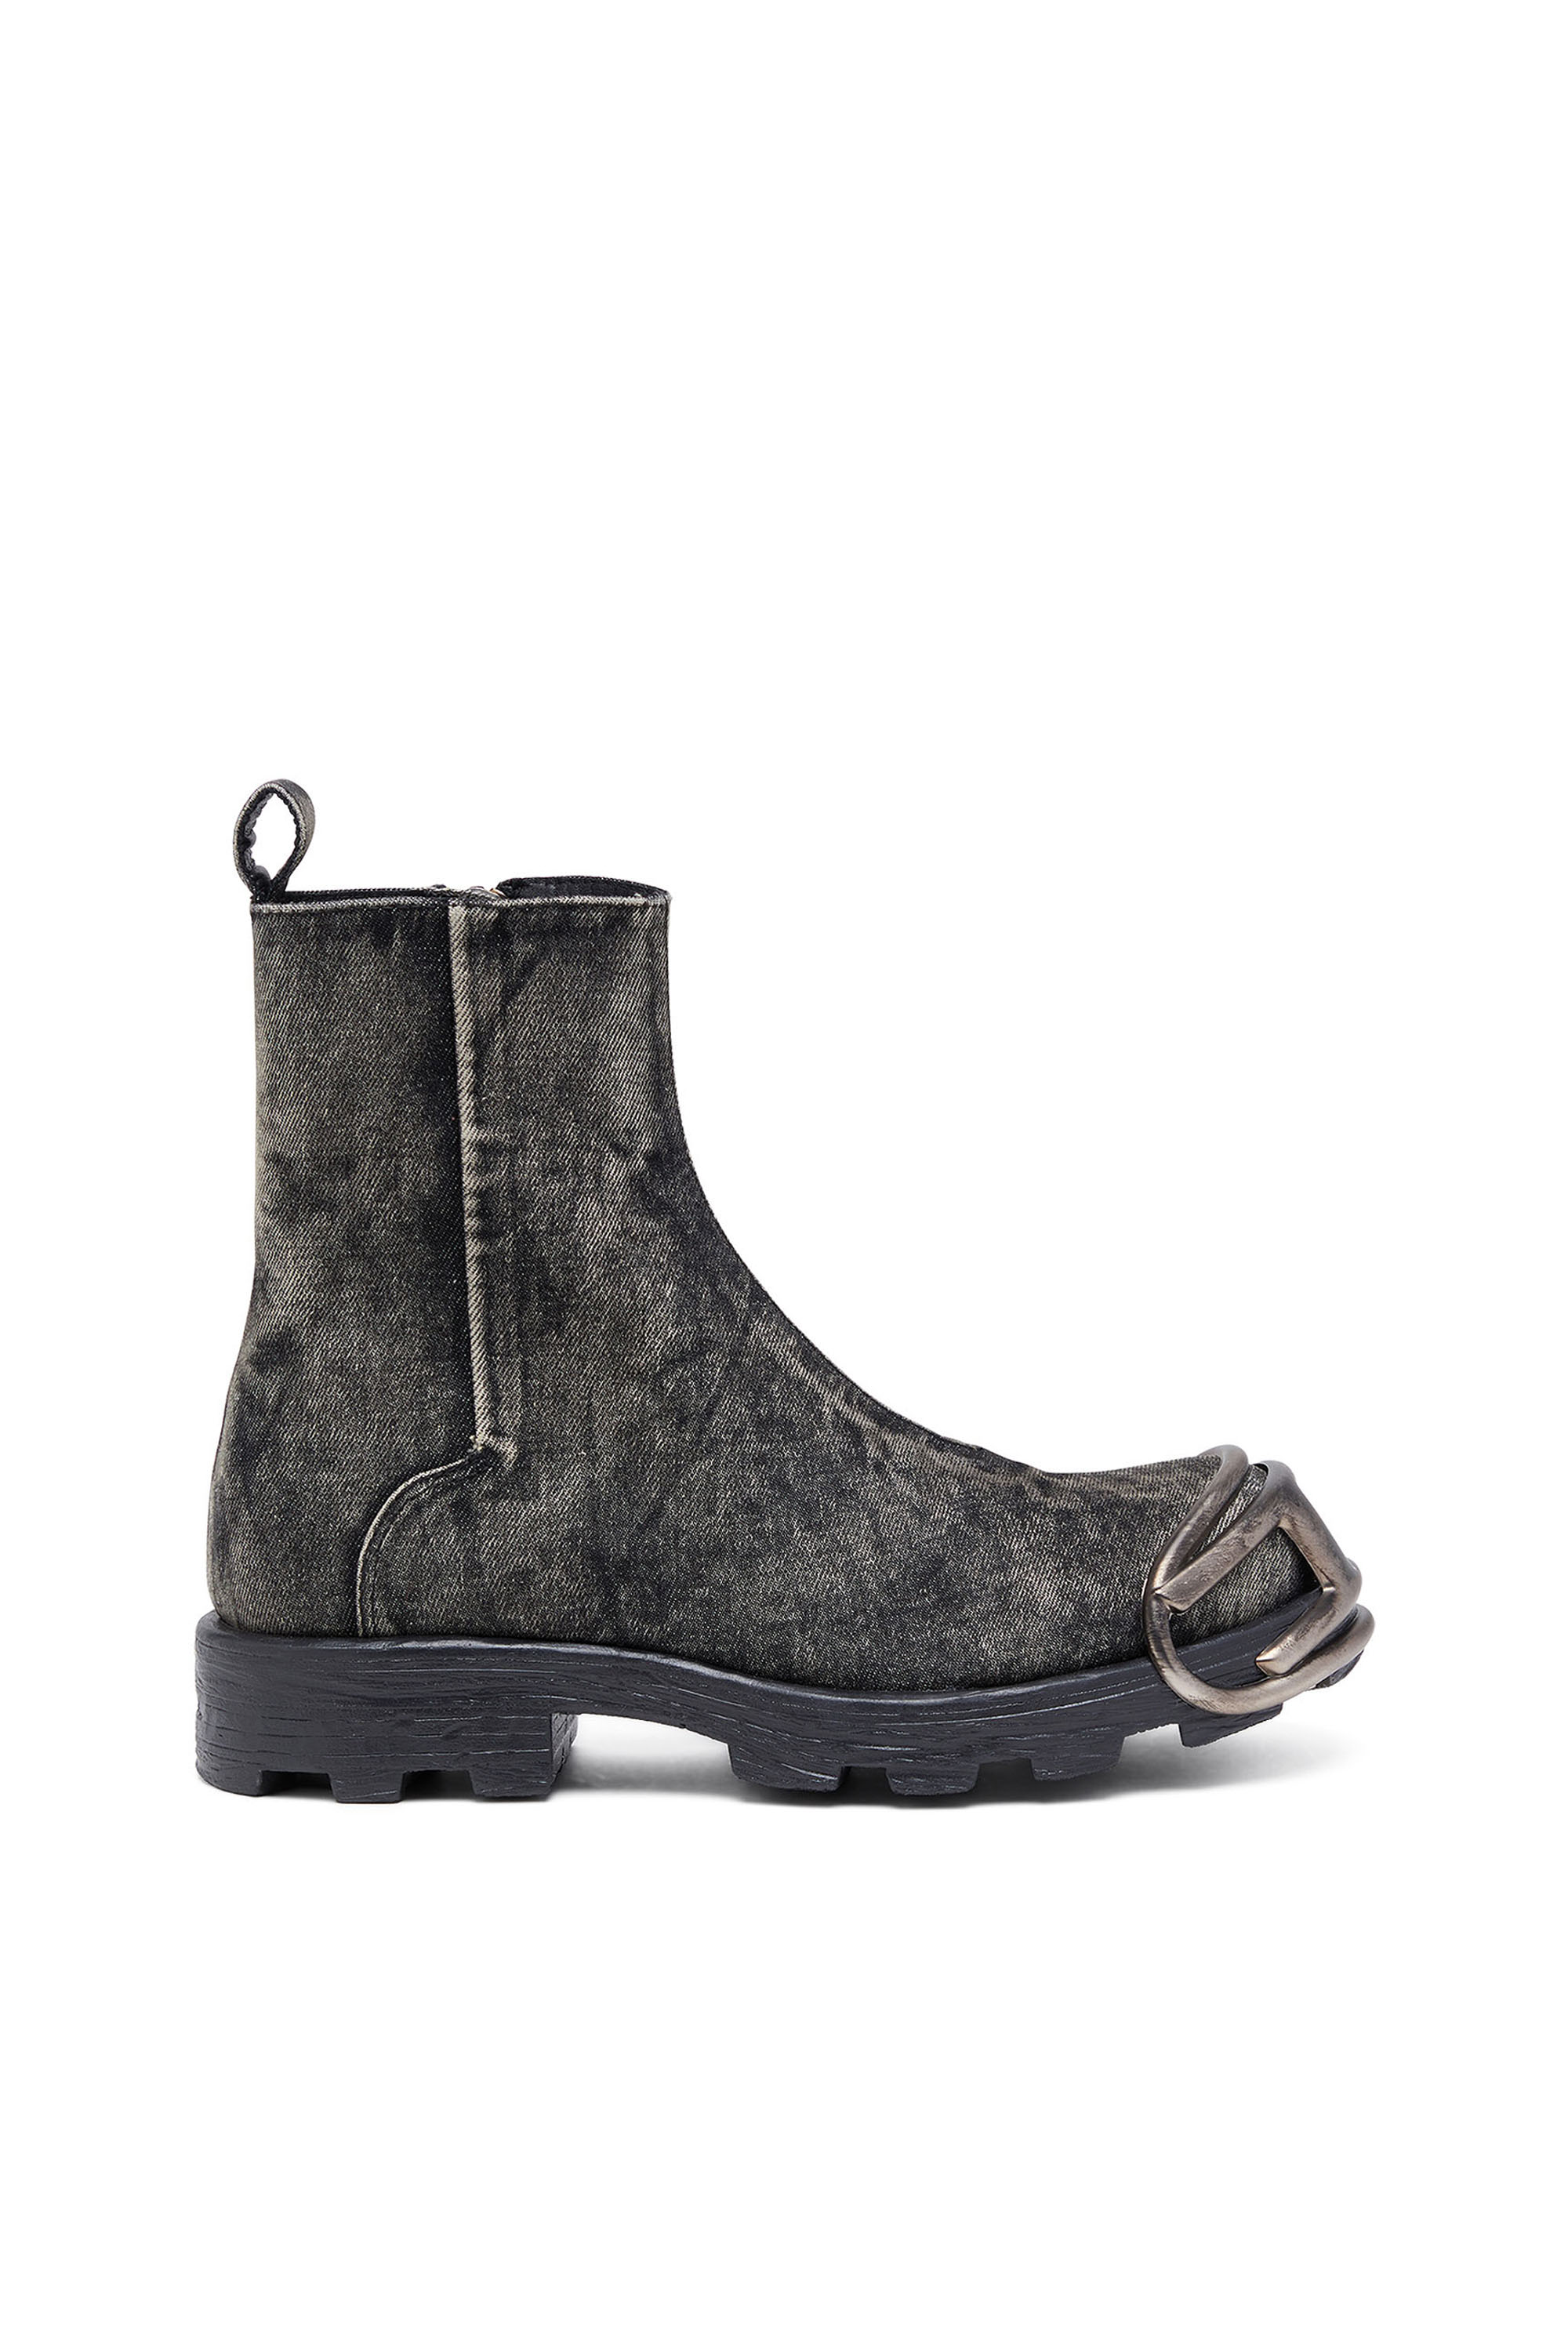 Diesel - D-HAMMER BT ZIP D, Male D-Hammer-Denim Chelsea boots with Oval D toe caps in ブラック - Image 1